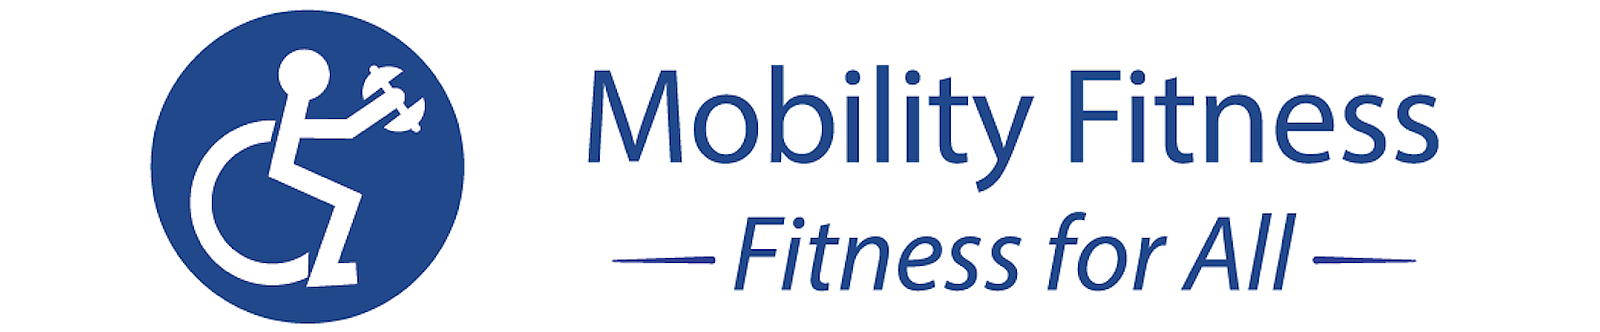 Mobility Fitness. Fitness For All.